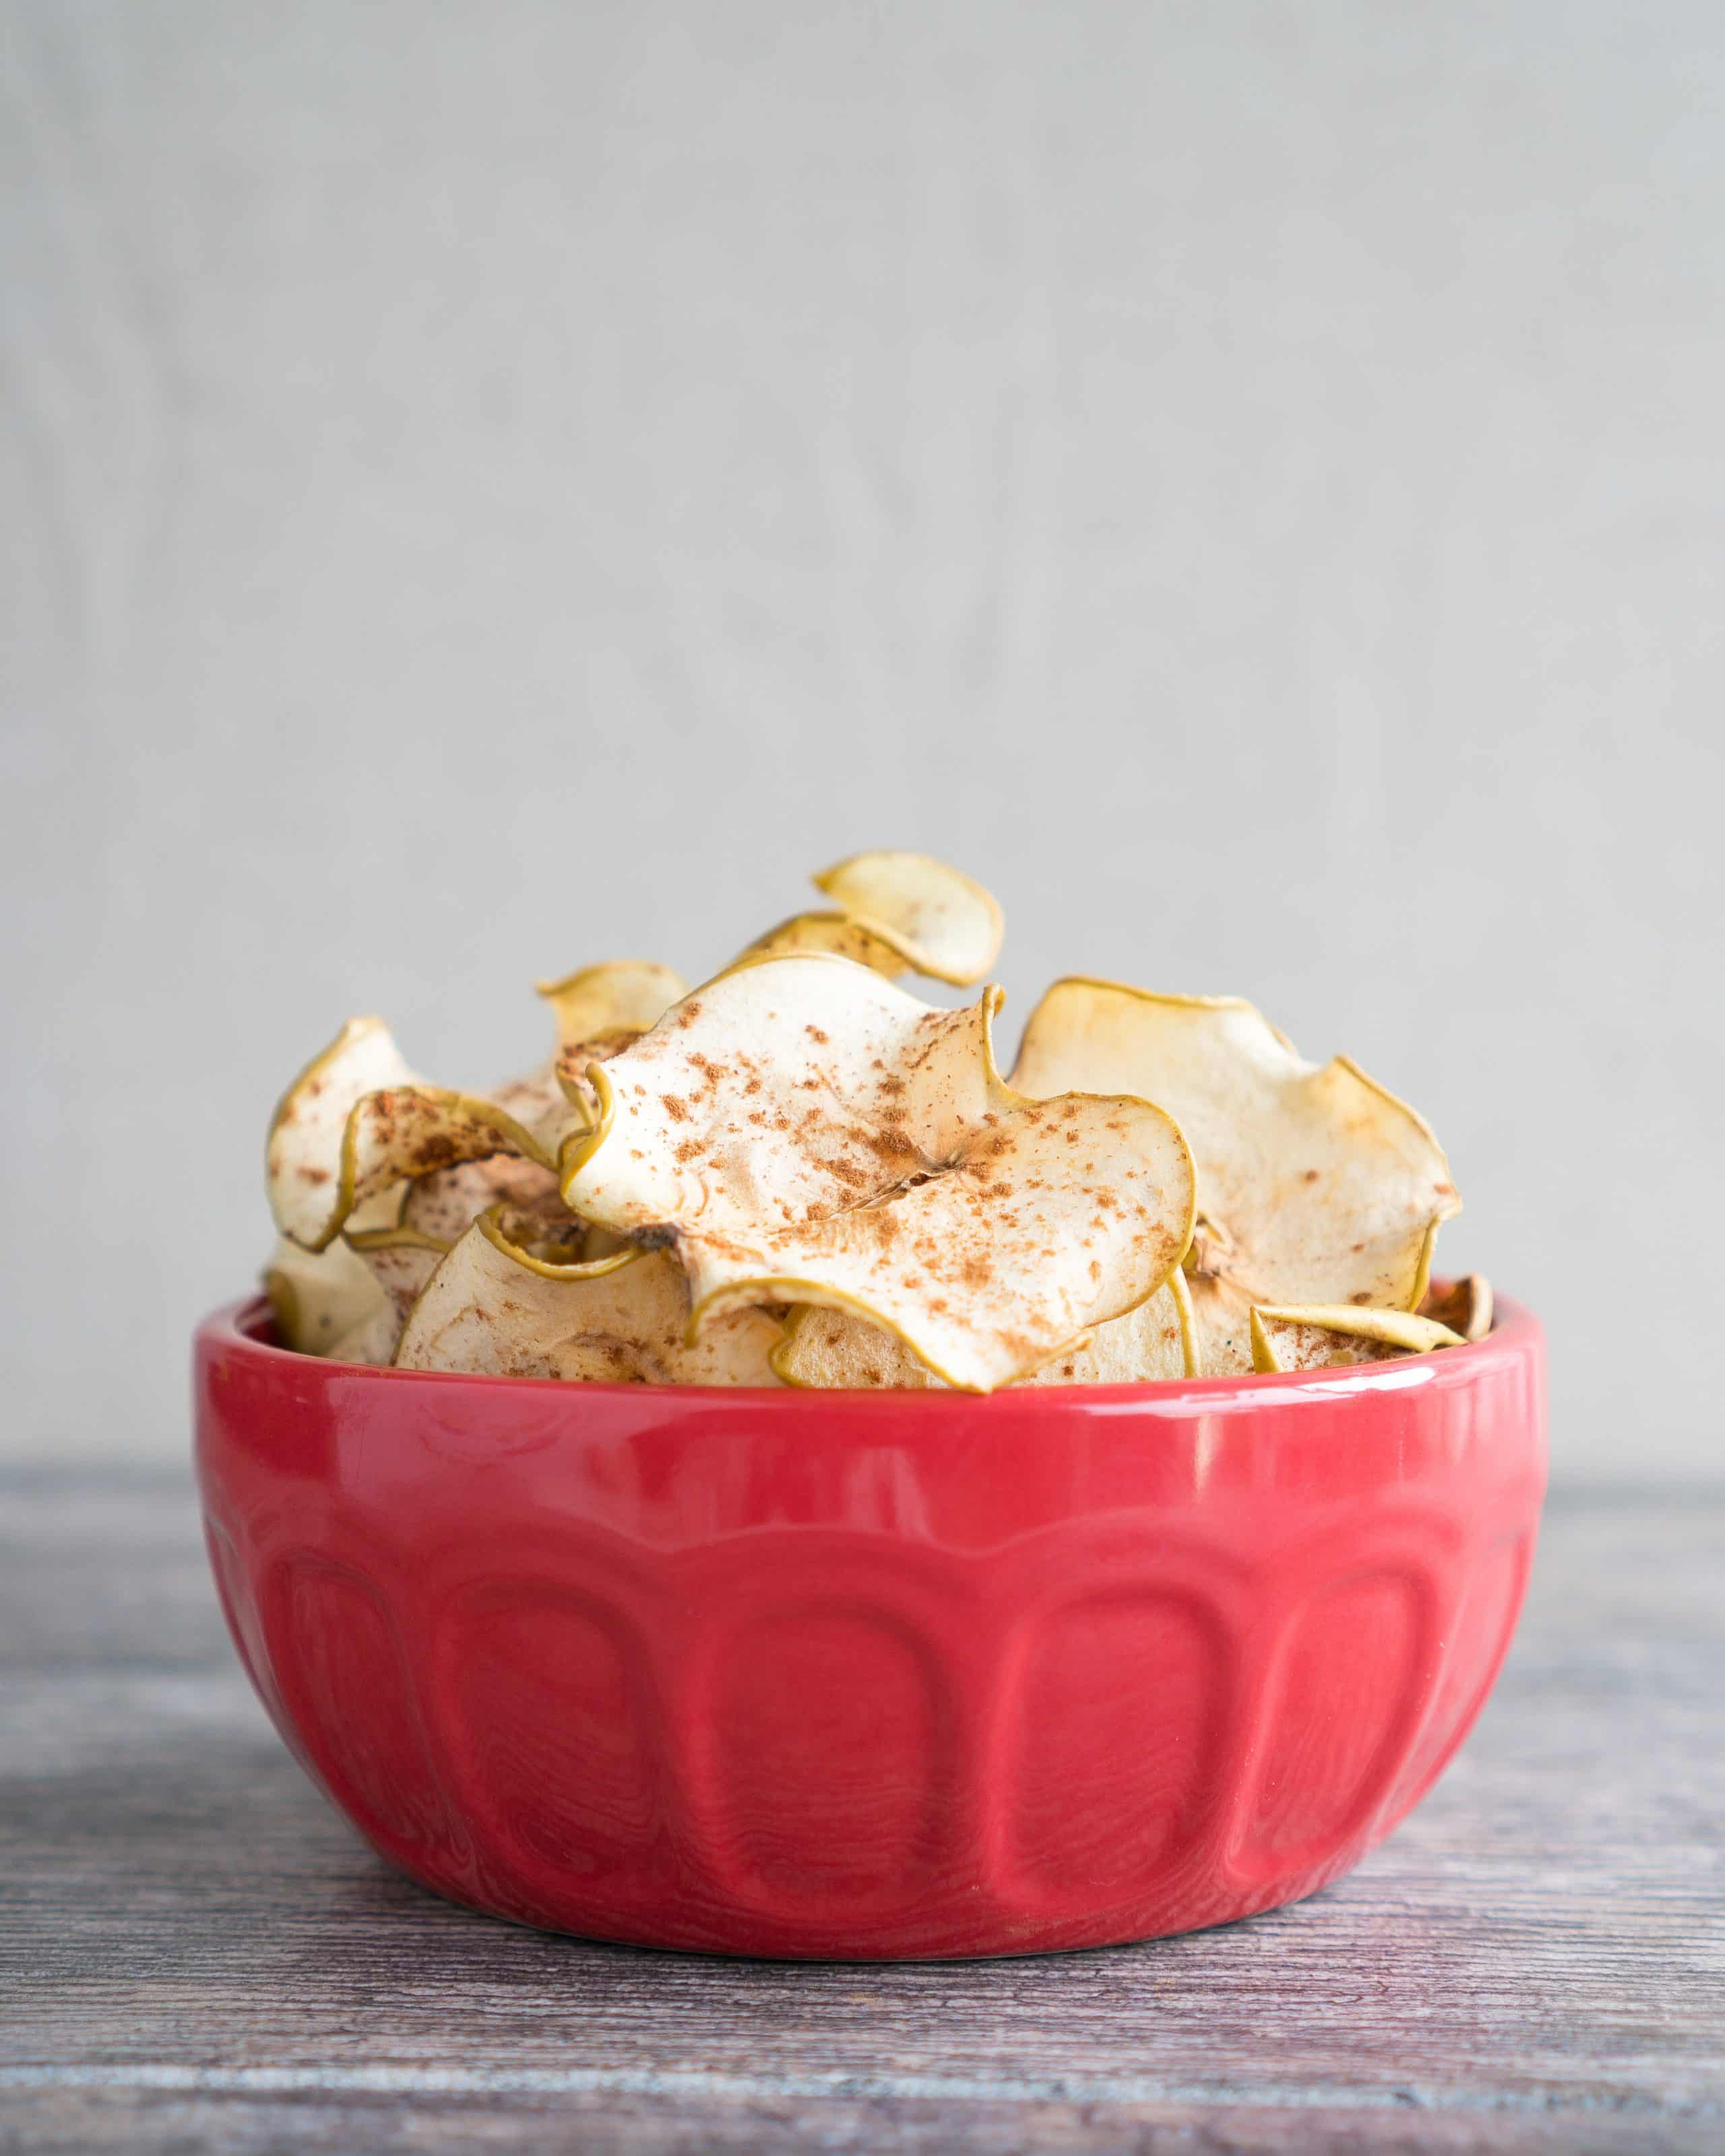 Cinnamon Spiced Apple Chips - Simple, 2-ingredient recipe for homemade Cinnamon Spiced Apple Chips. We love that this naturally sweet, healthy snack uses only whole apples and a sprinkle of cinnamon! Paleo-friendly, gluten-free, sugar-free & vegan ♥ | freeyourfork.com